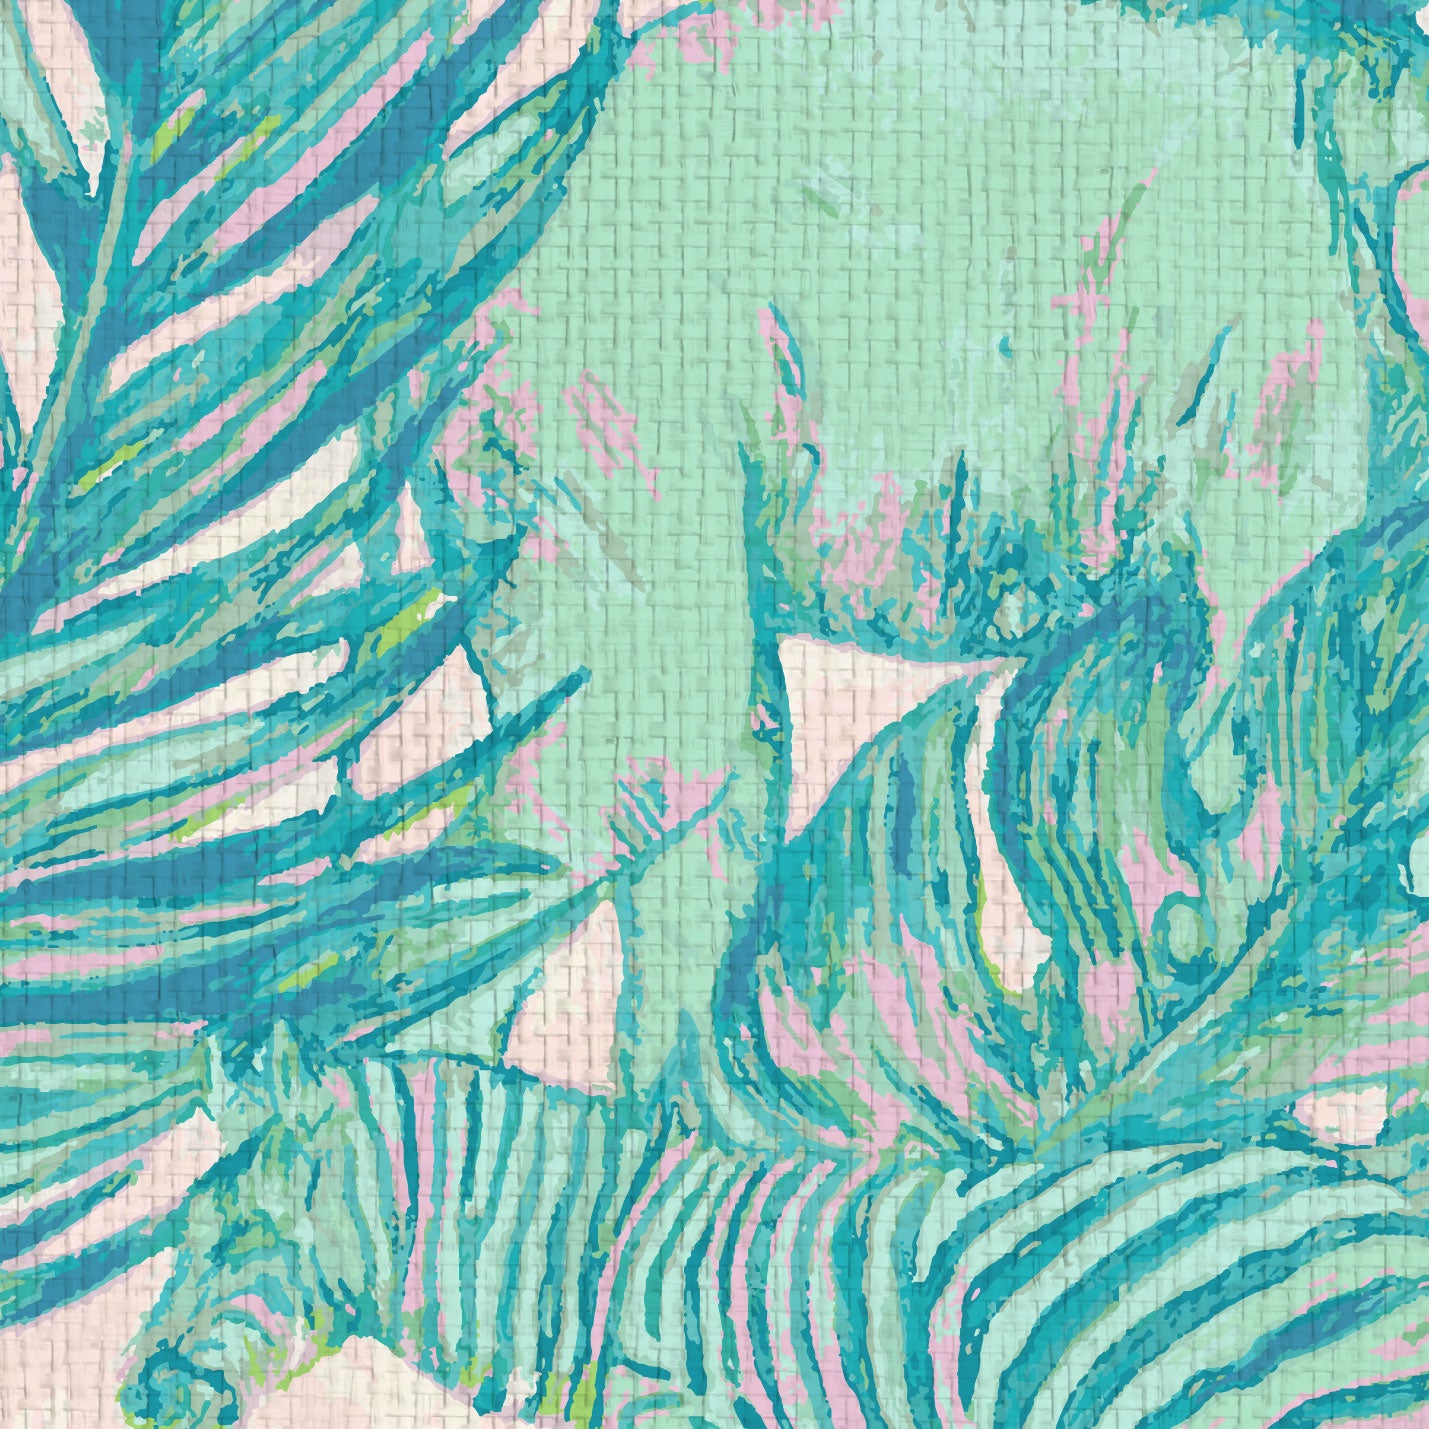 wallpaper Natural Textured Eco-Friendly Non-toxic High-quality Sustainable Interior Design Bold Custom Tropical Jungle Coastal Garden palm leaf tree zoo safari elephant zebra cheetah gorilla water color oversized kids playroom nursery teal green pastel neon pink paperweave paper weave